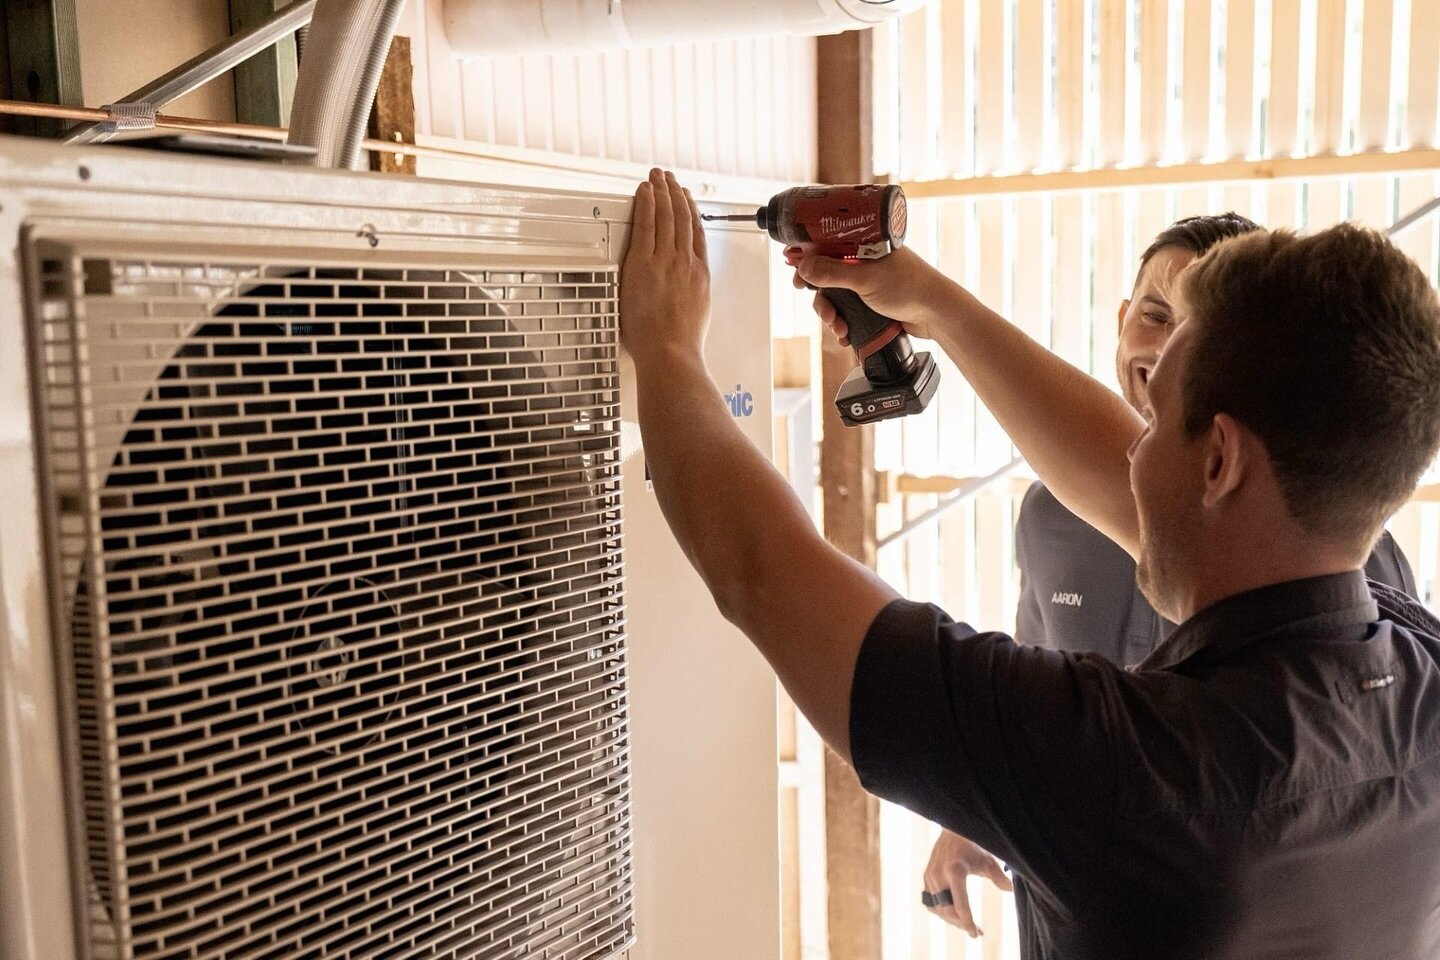 Exciting Opportunity Alert! 📣

We&rsquo;re on the lookout for an experienced AIR CONDITIONING &amp; REFRIGERATION TECHNICIAN to join our growing team.

Check out below for more details 👇

https://www.seek.com.au/job/73384191?tracking=SHR-WEB-Shared